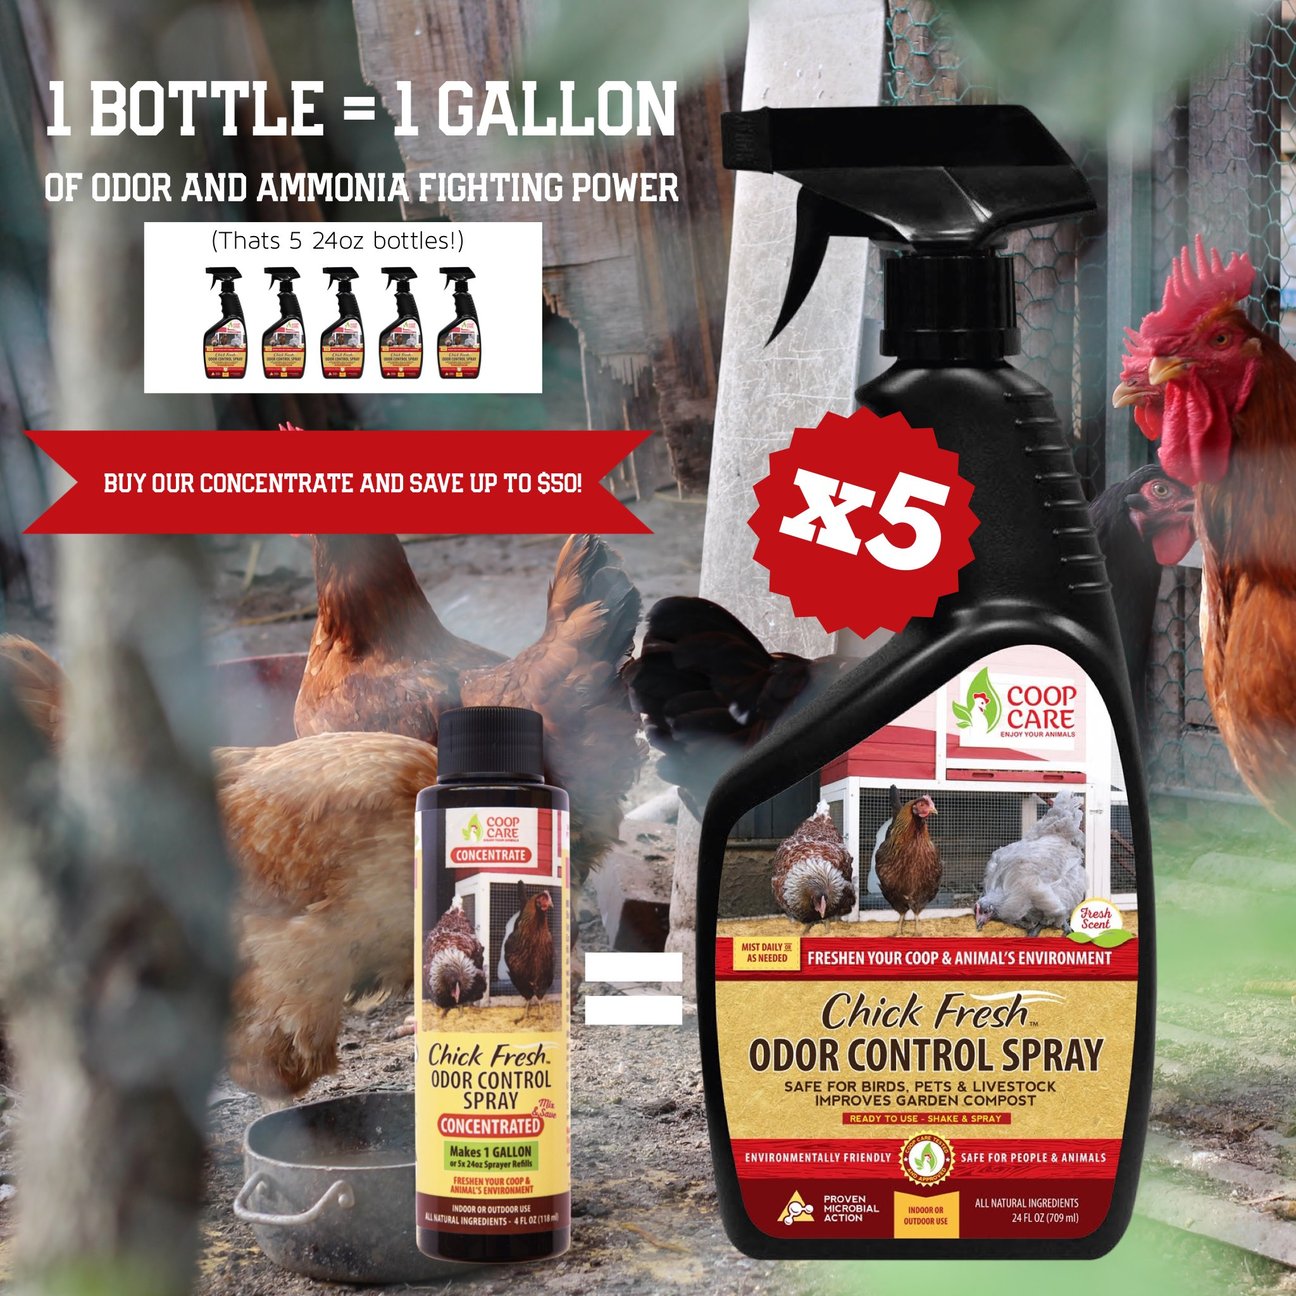 Chick Fresh Concentrate - Eliminate Odors in Brooder, Coop, Litter Box, etc. FREE 24 oz. Sprayer - FlexTran Animal Care